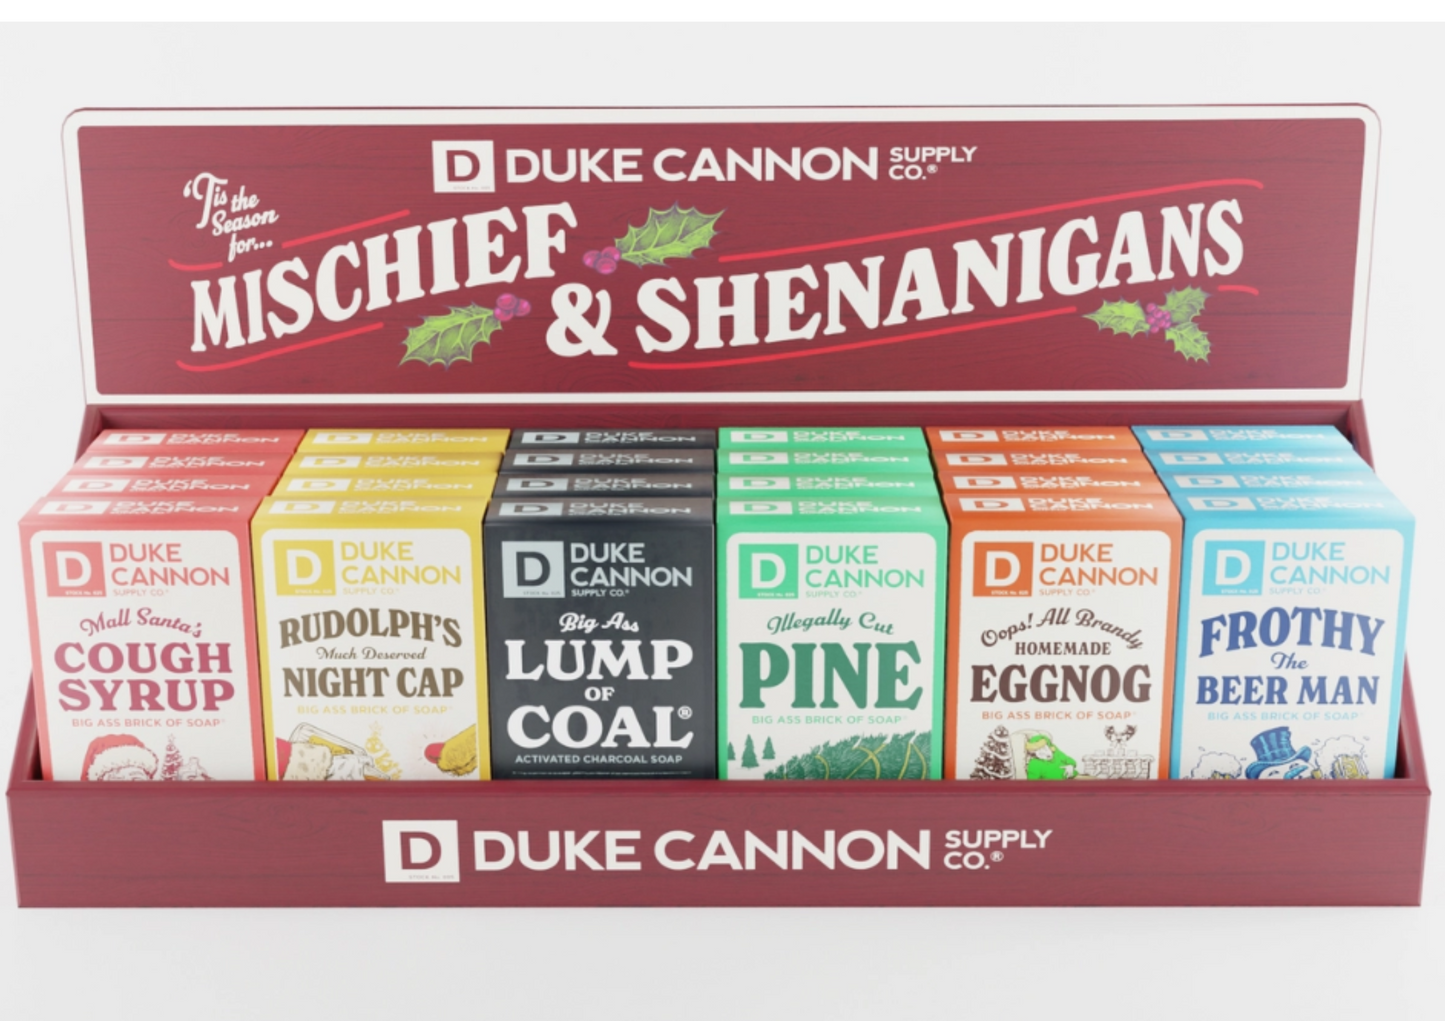 Duke Cannon Big Ass Brick of Soap - Cough Syrup